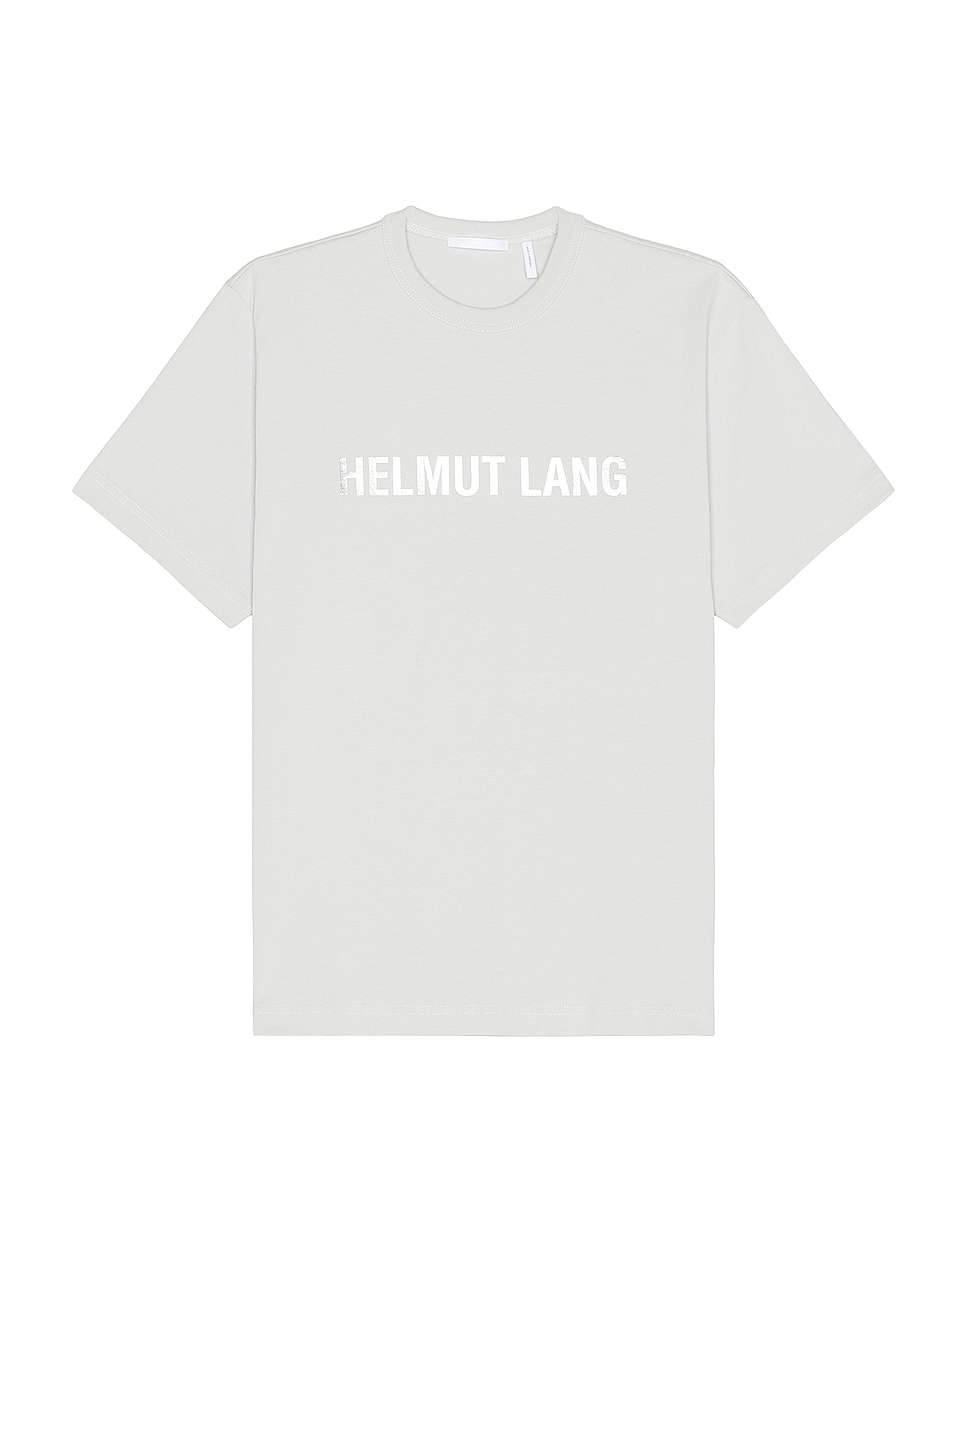 Image 1 of Helmut Lang Outer Space 6 Tee in Celestial Blue